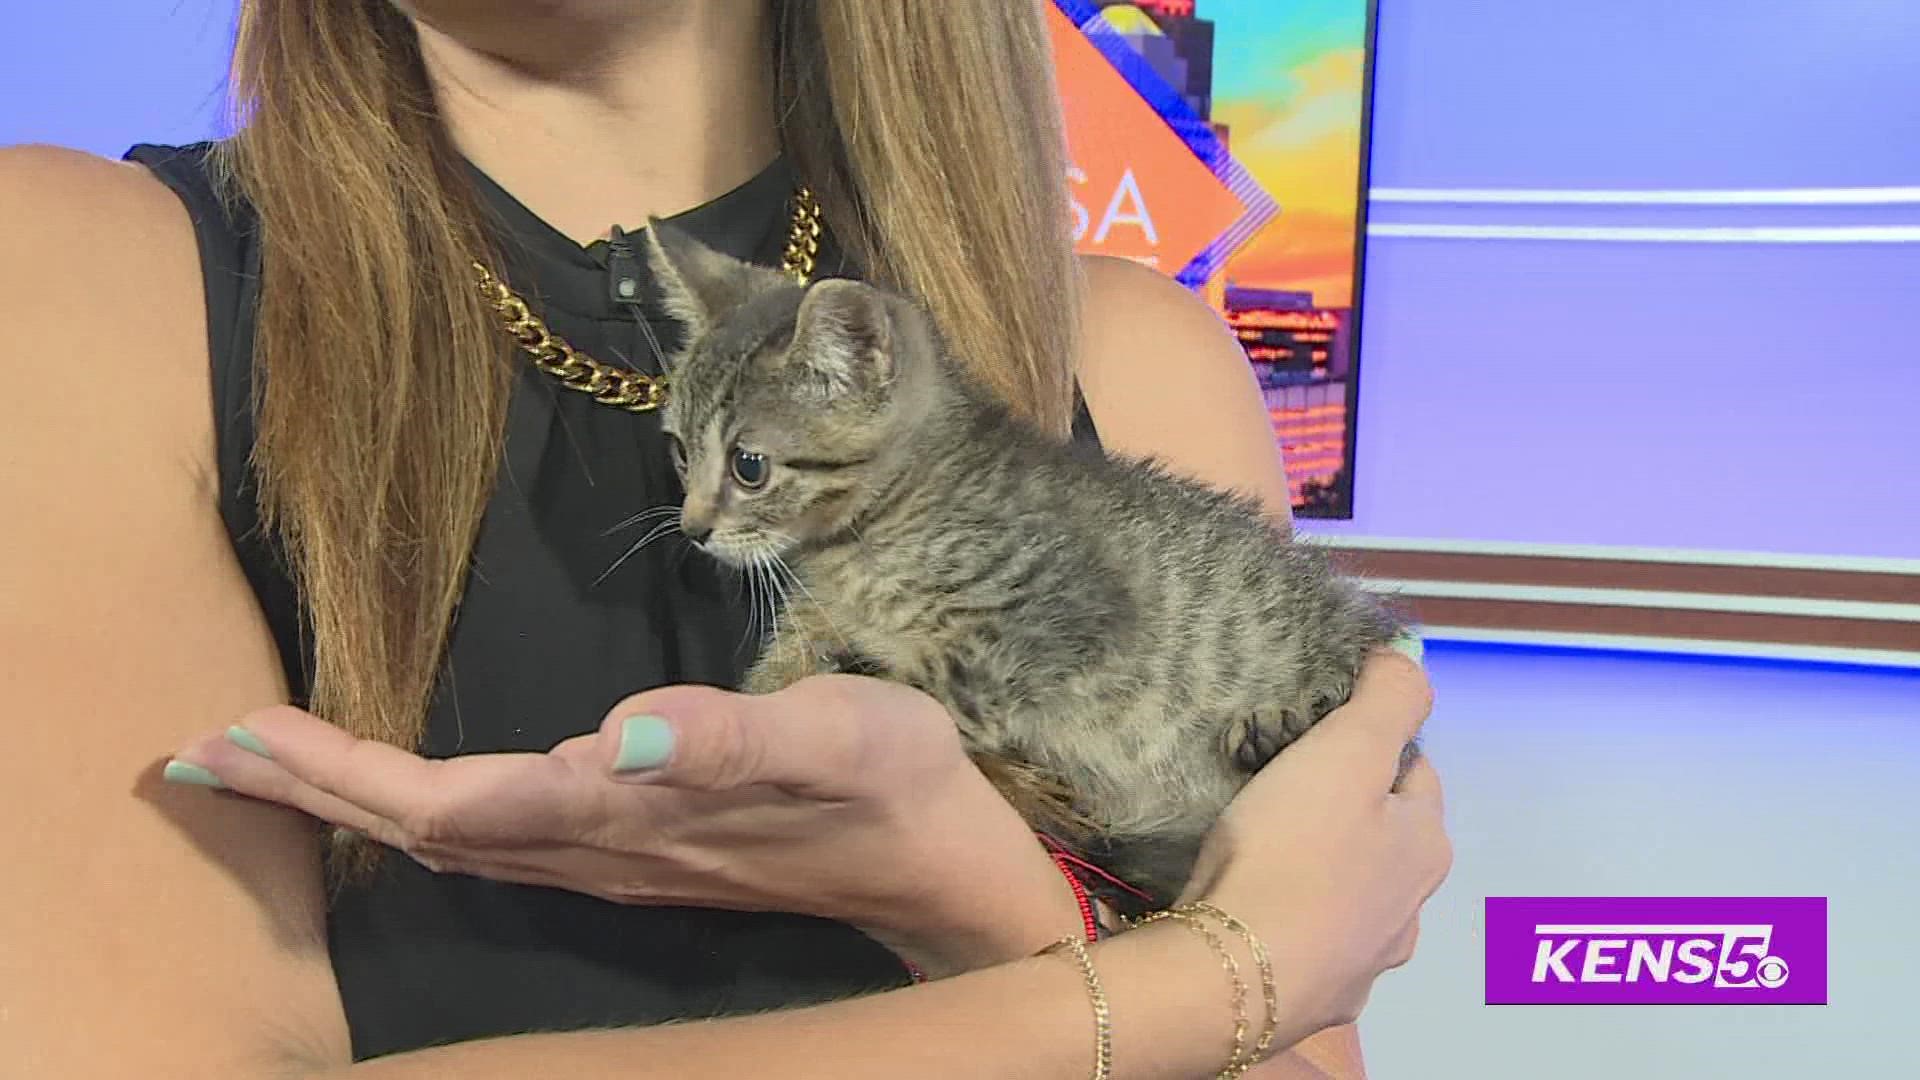 San Antonio Pets Alive will make the adoption process as easy as buying cat food.